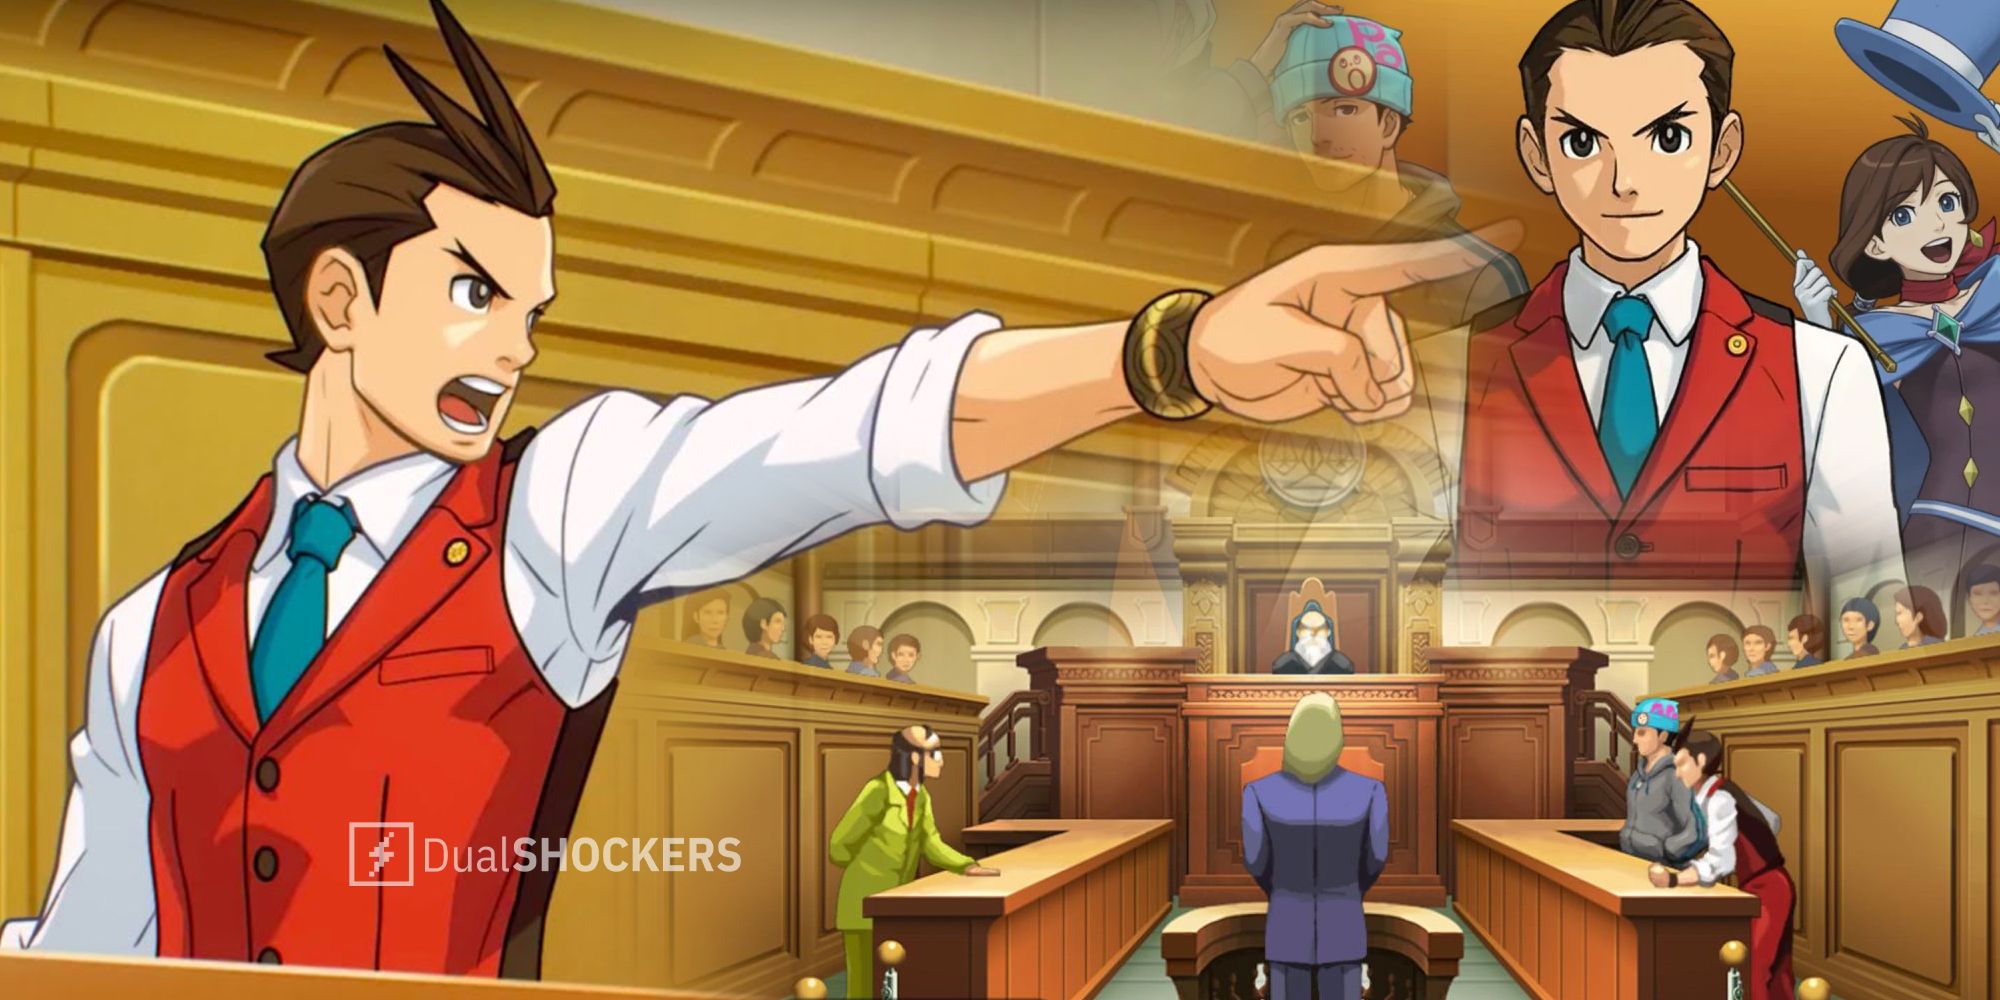 Apollo Justice: Ace Attorney gameplay